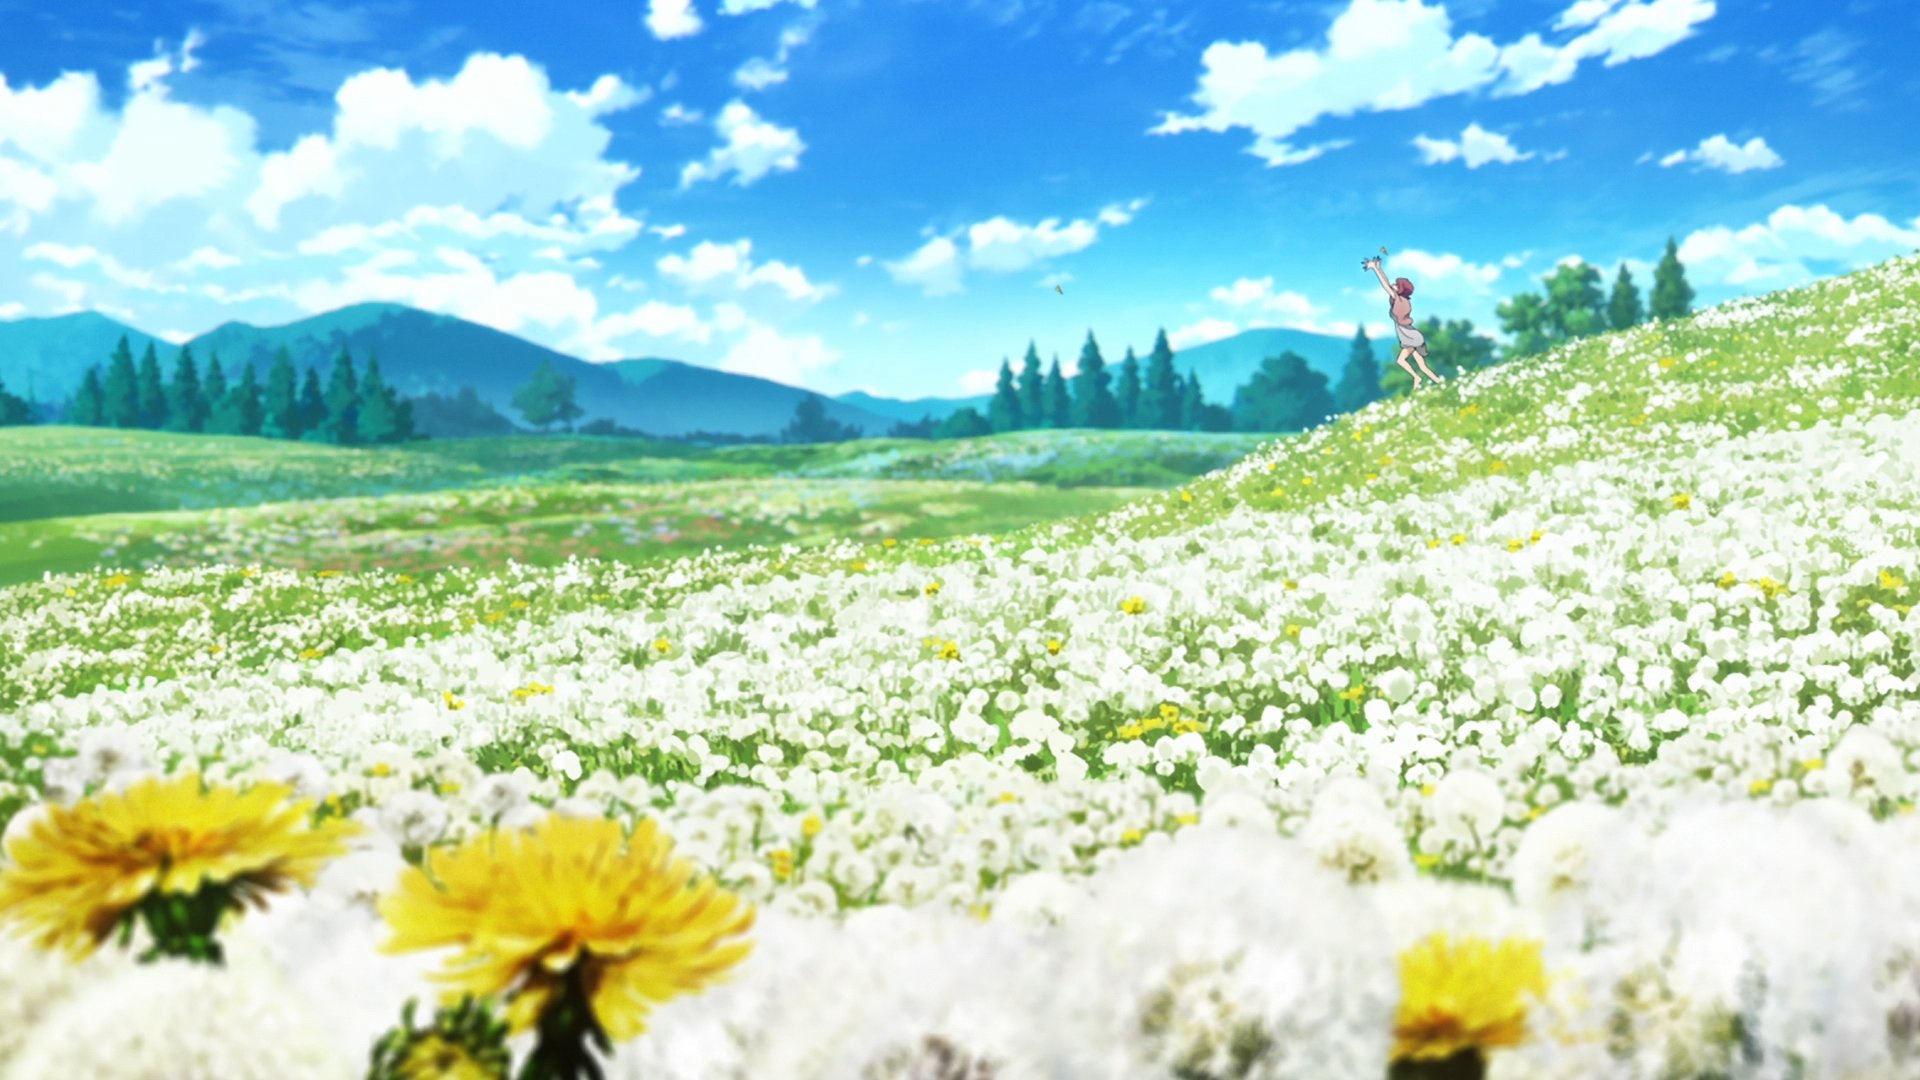 Anime Flower Field Wallpapers - Wallpaper Cave